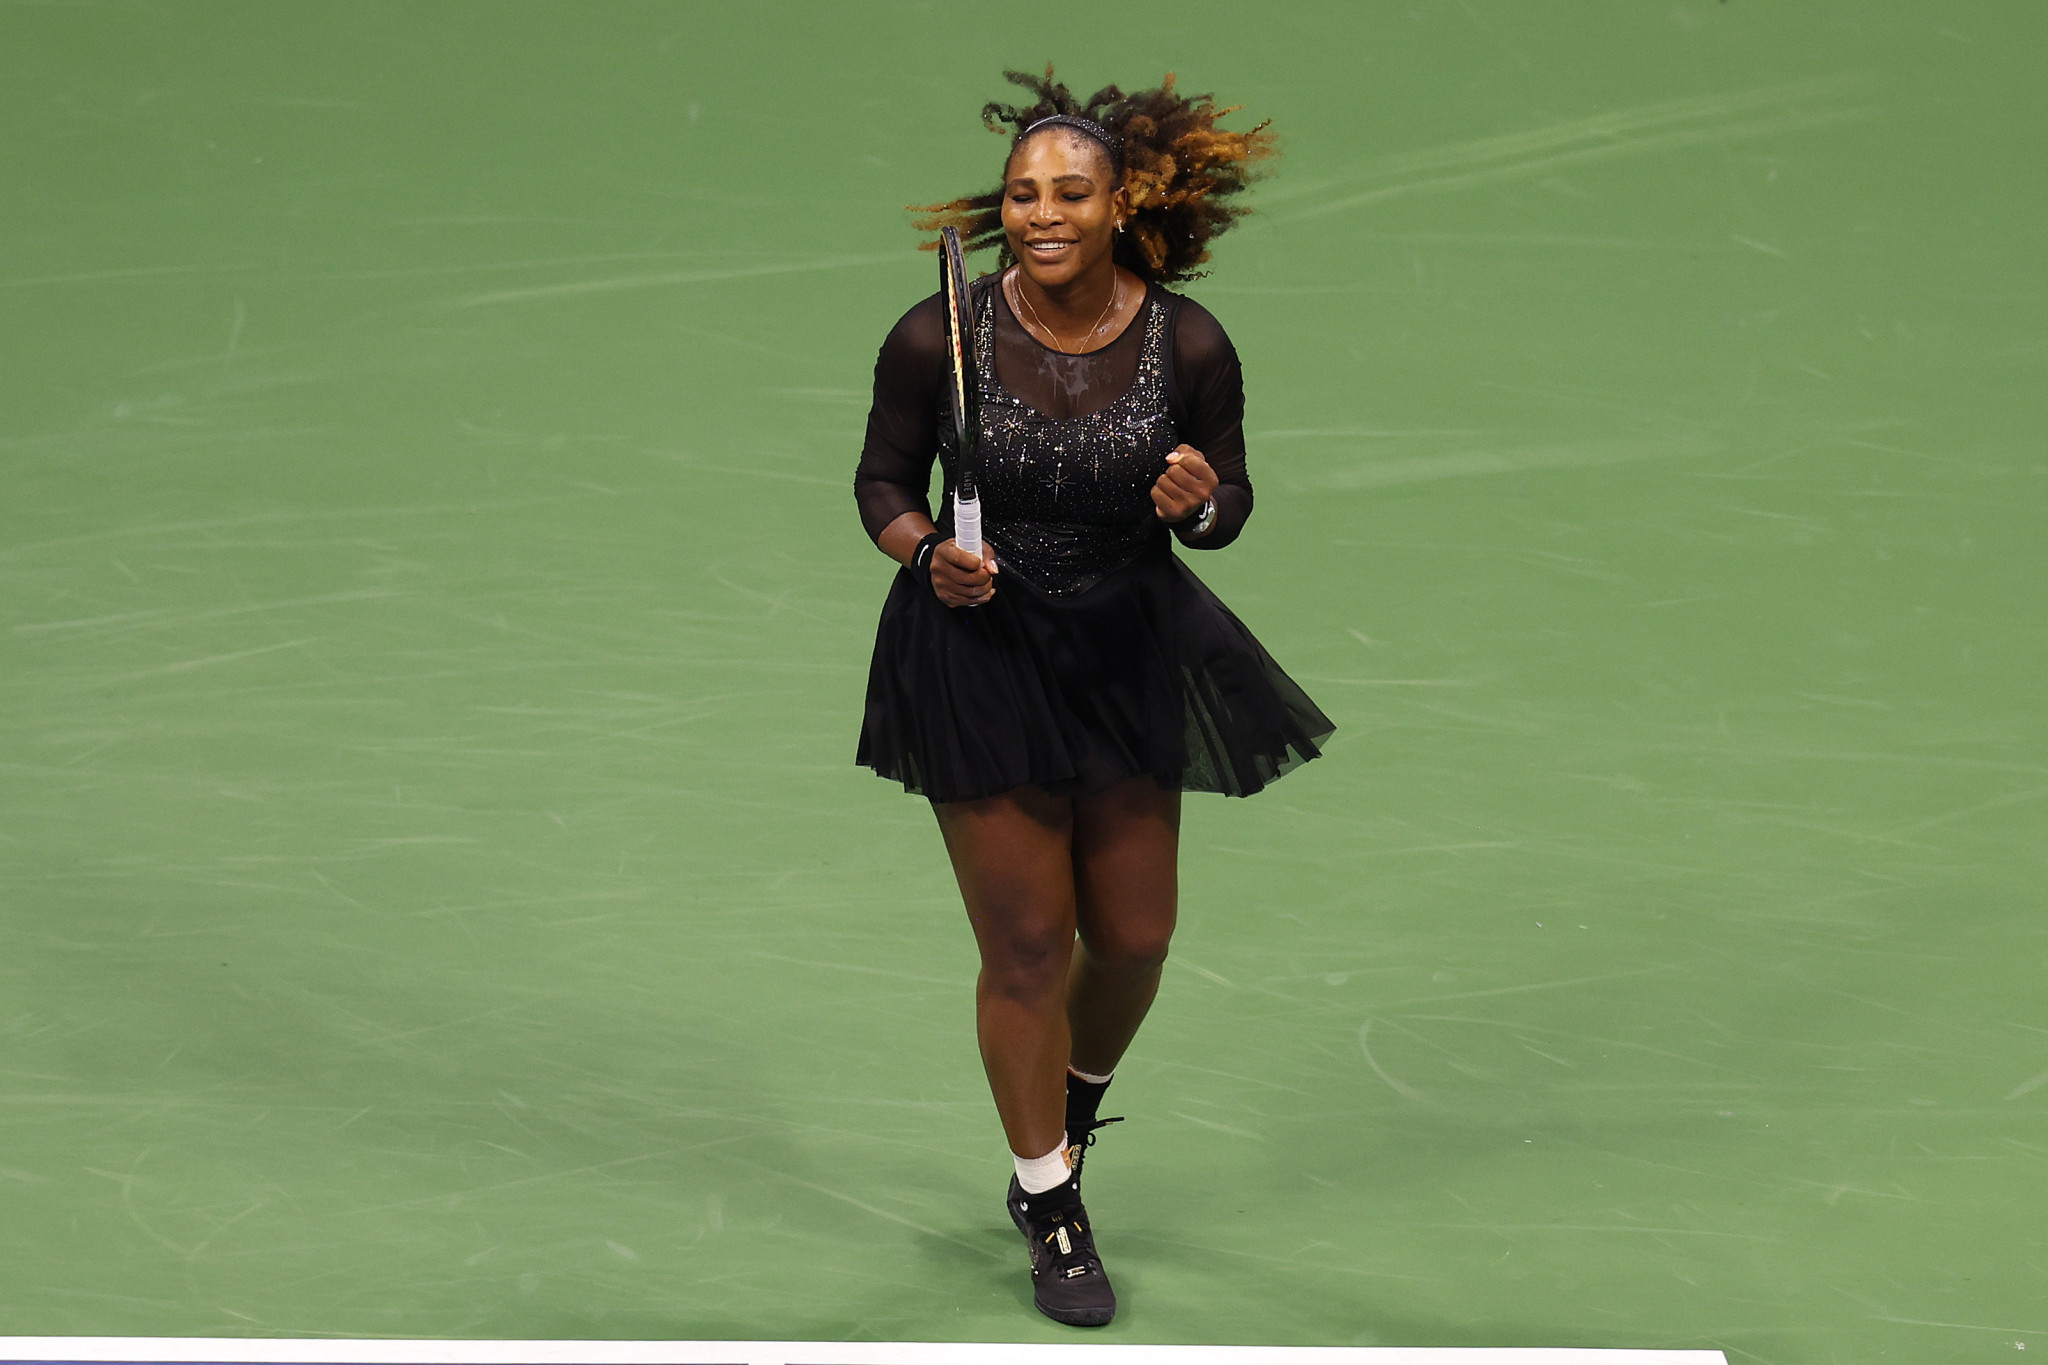 Serena Williams is set to retire from tennis after her campaign at the US Open ©Getty Images